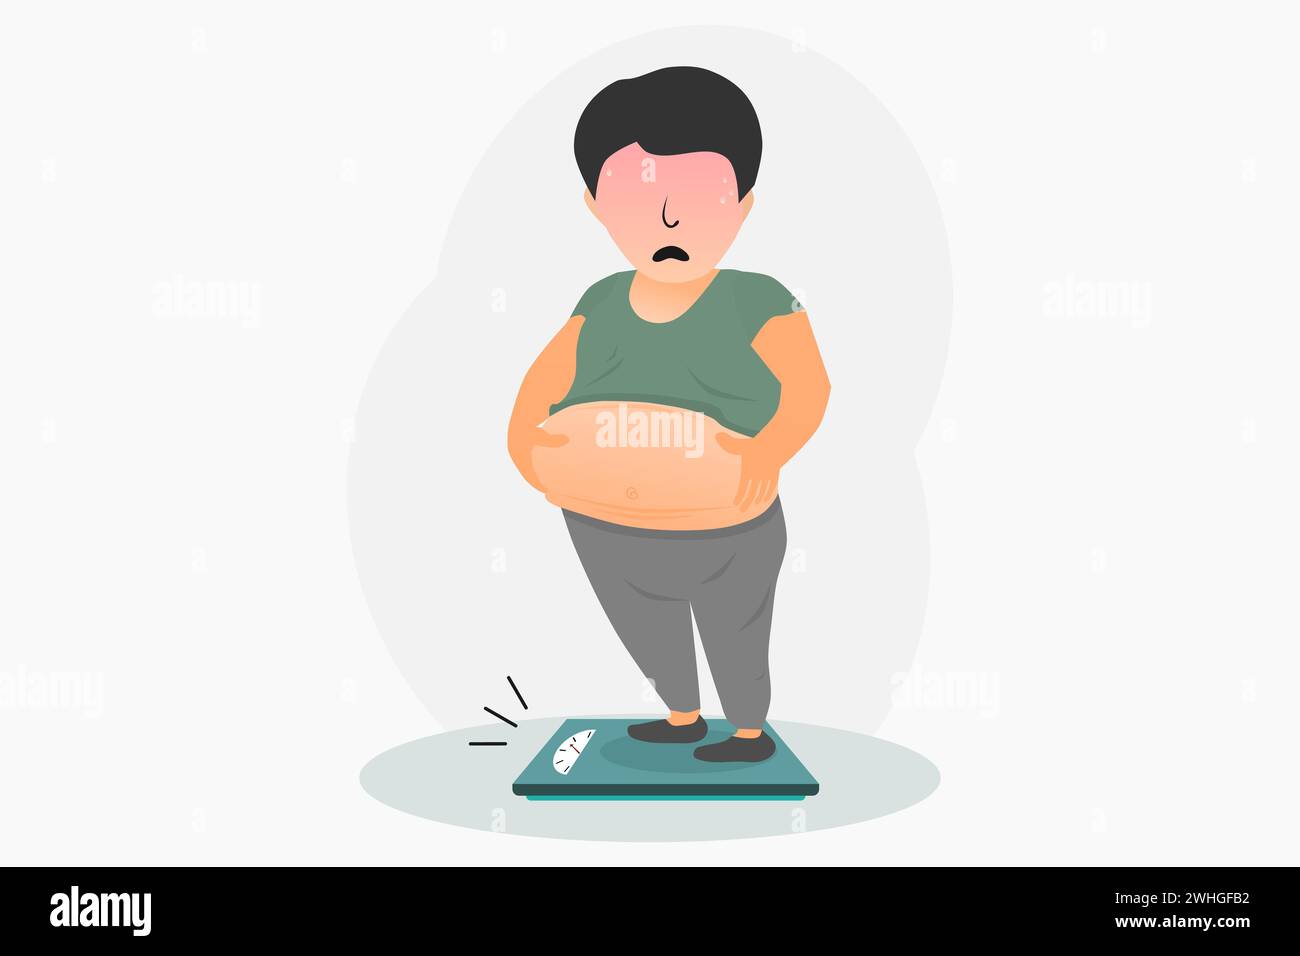 A fat pot-bellied man standing on the scales. Overweight man. Vector illustration. Stock Vector